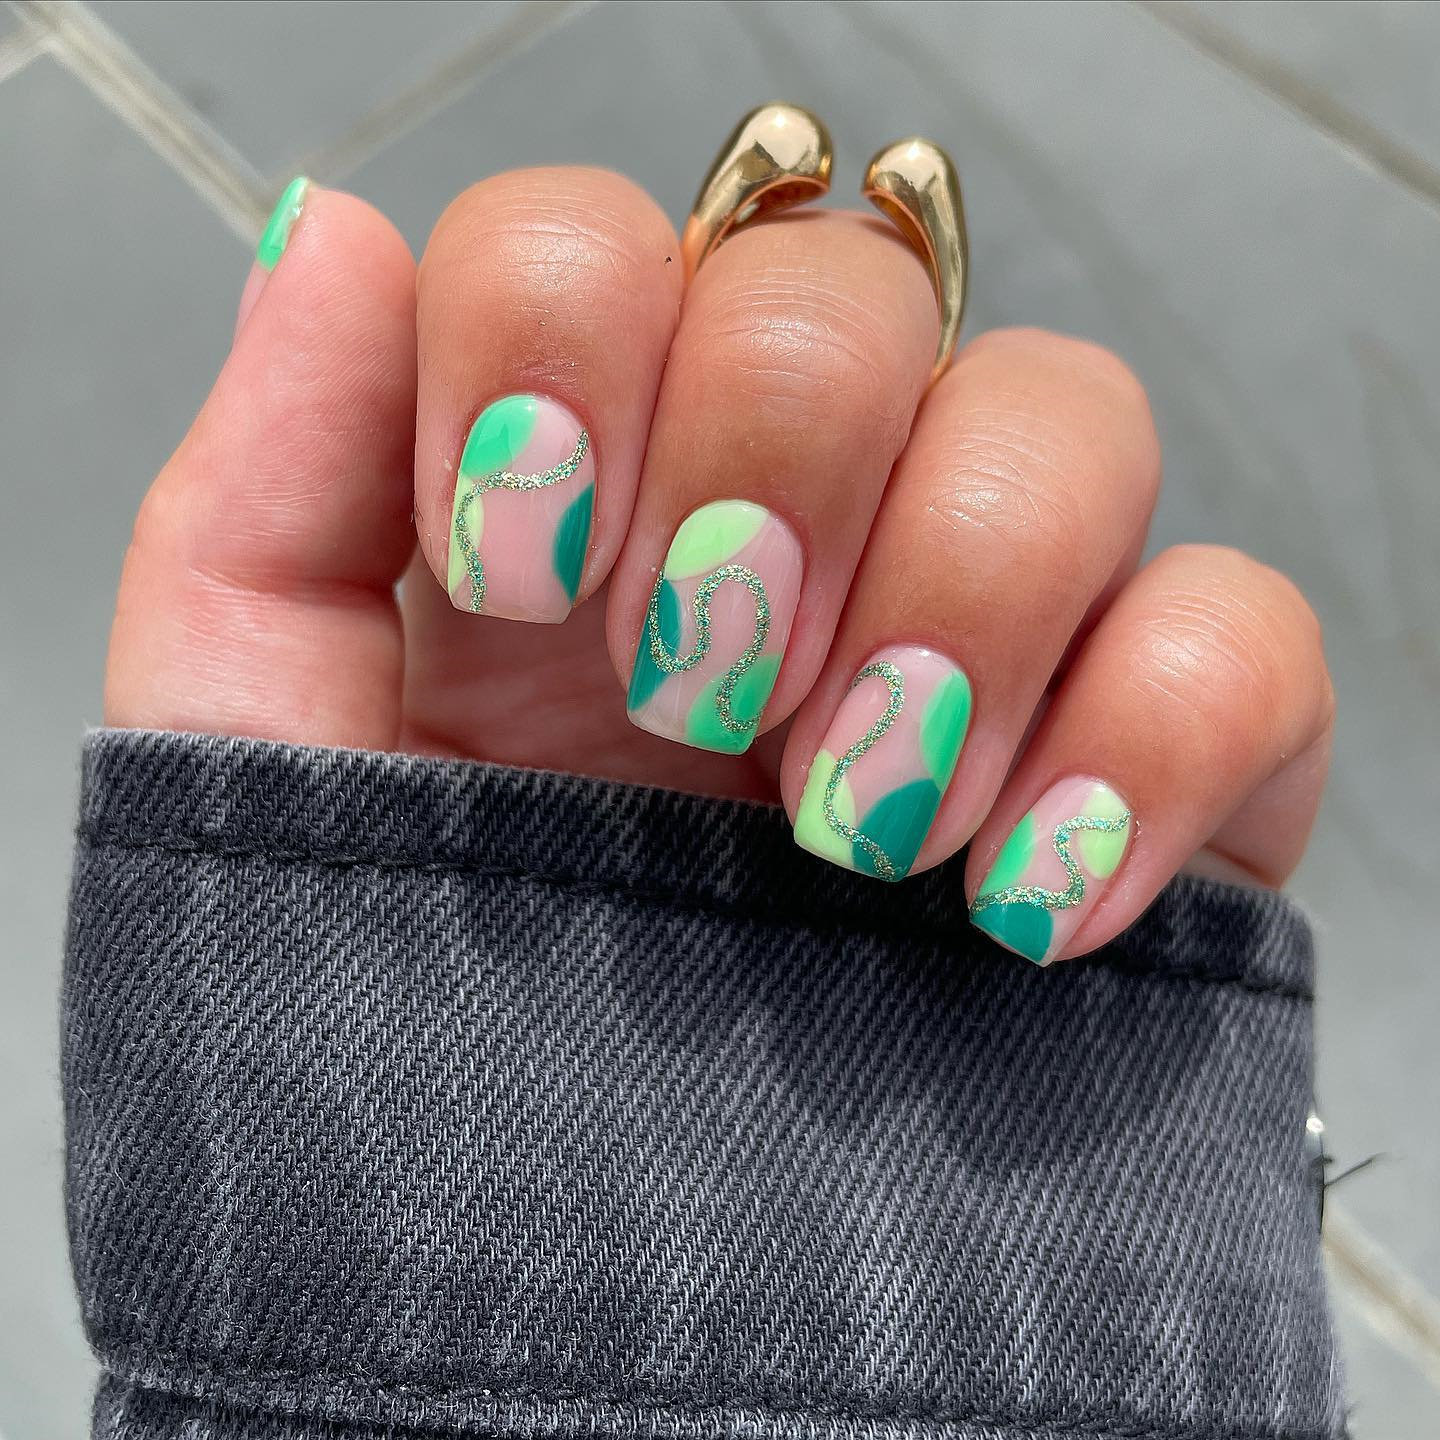 Green nail designs, green nails for the Spring, simple green nails ideas, short square green nails ideas